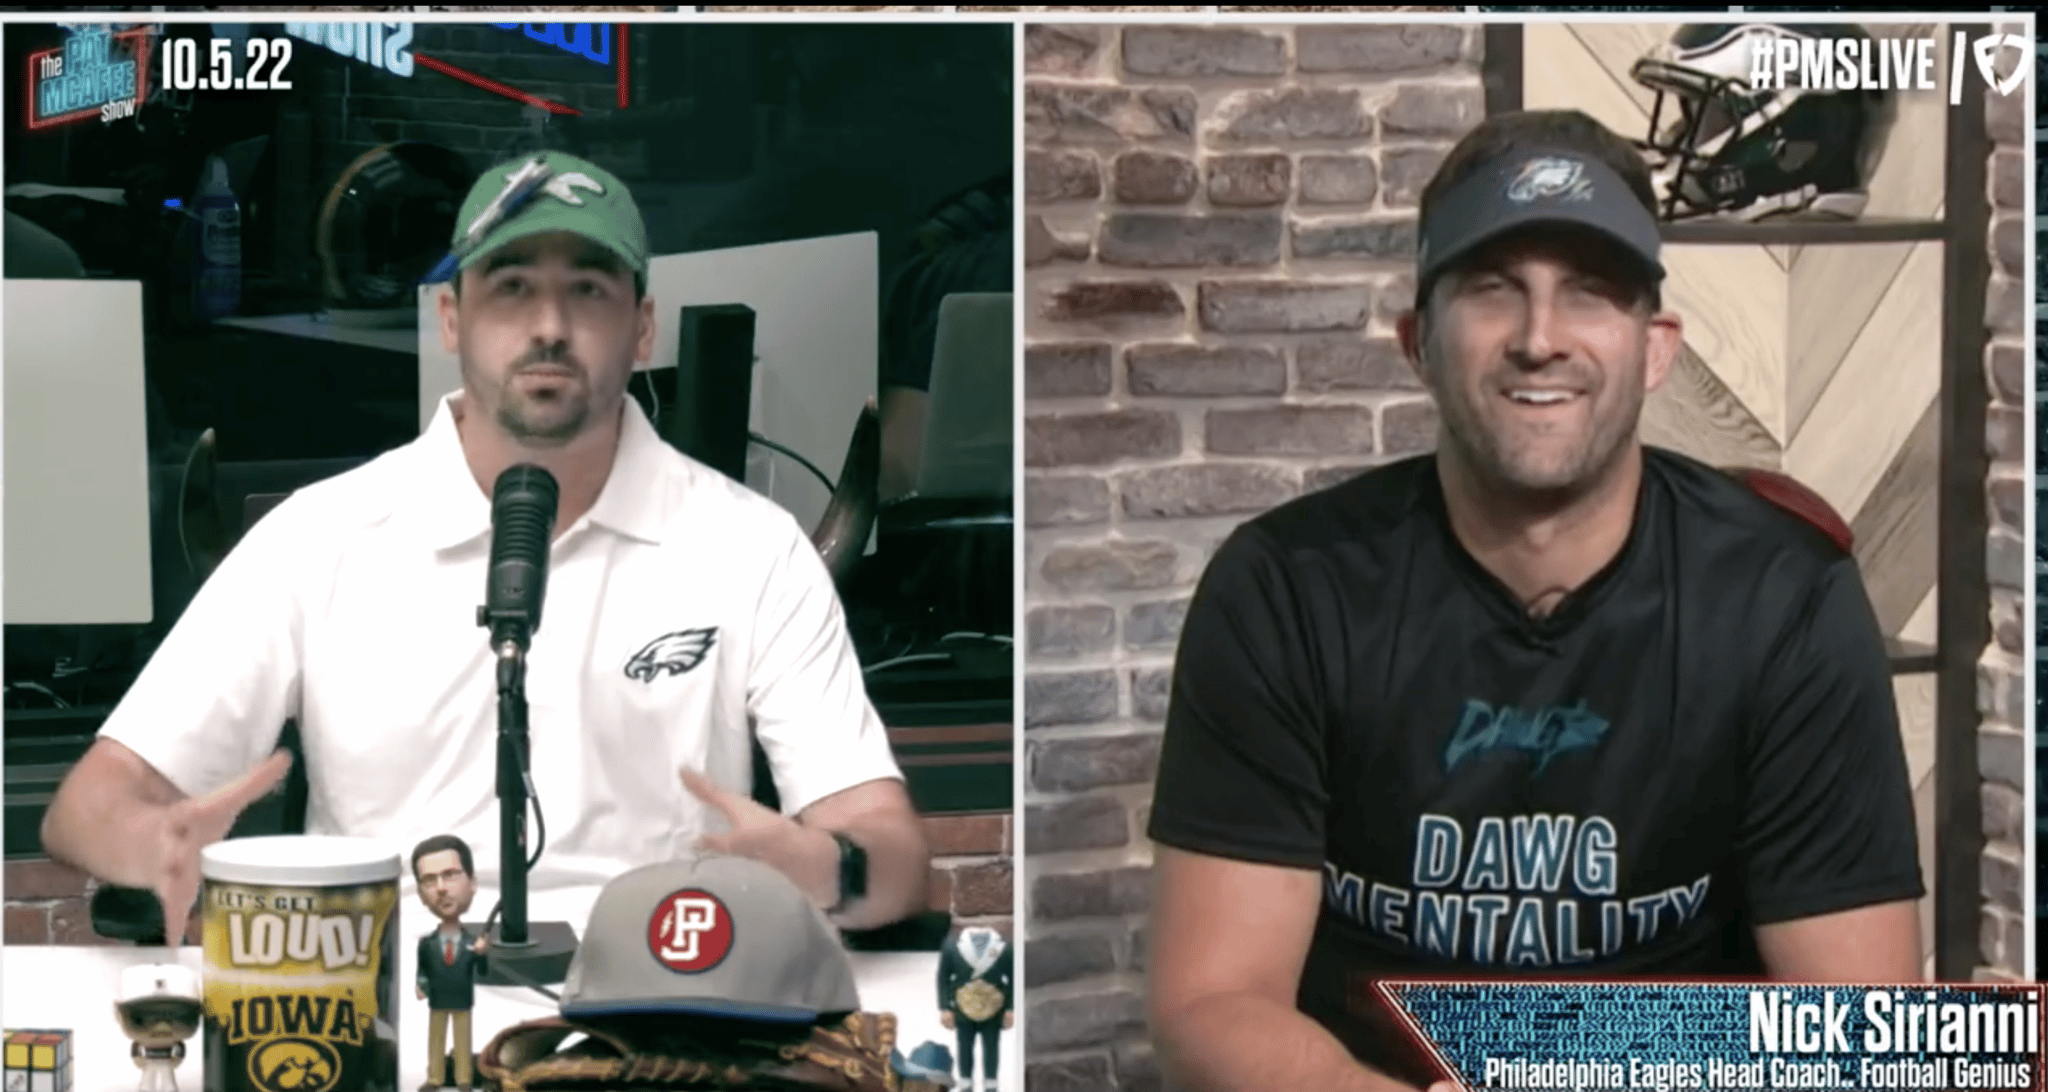 “HE’S A DAWG!” – Nick Sirianni Talks Jalen Hurts on the Pat McAfee Show